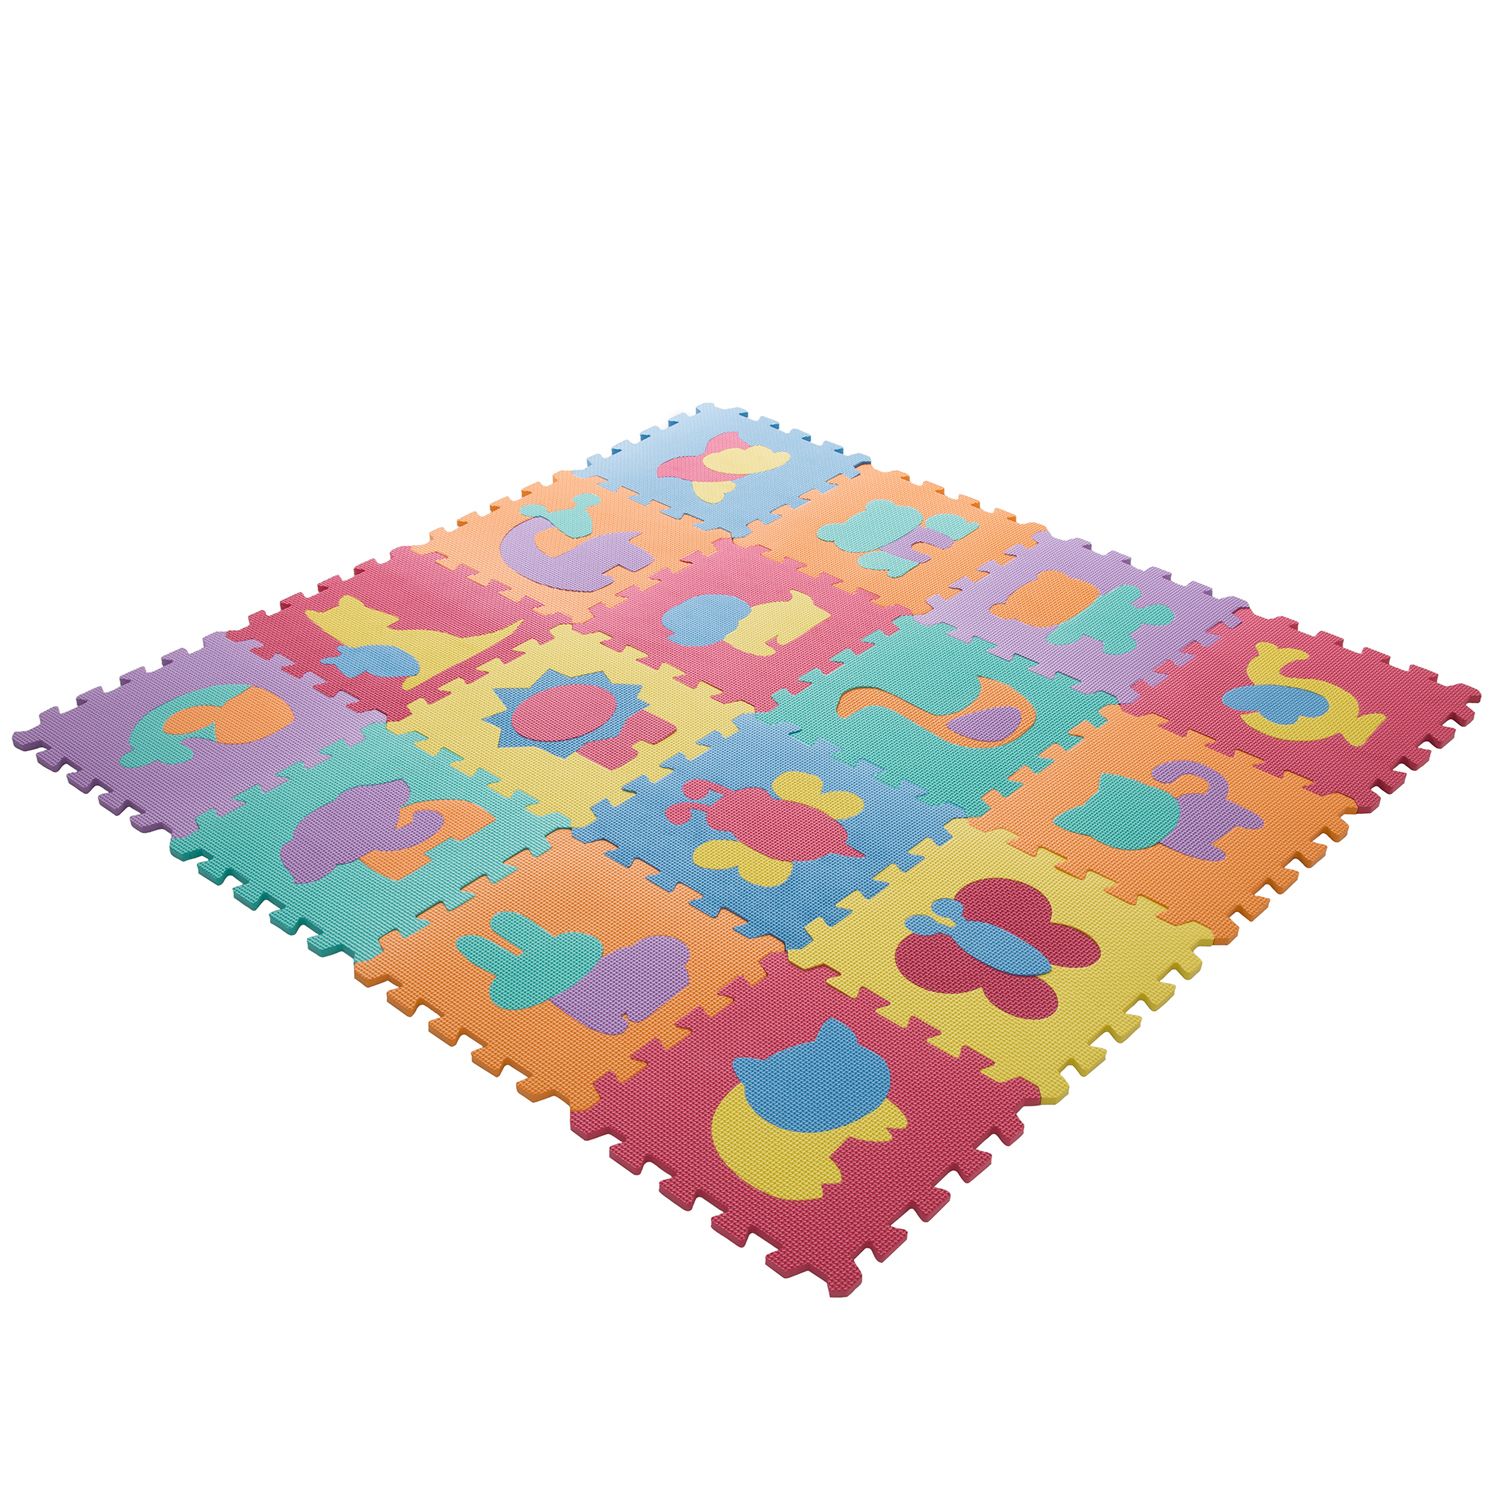 Image for Hey! Play! Interlocking Foam Tile Play Mat with Animals at Kohl's.